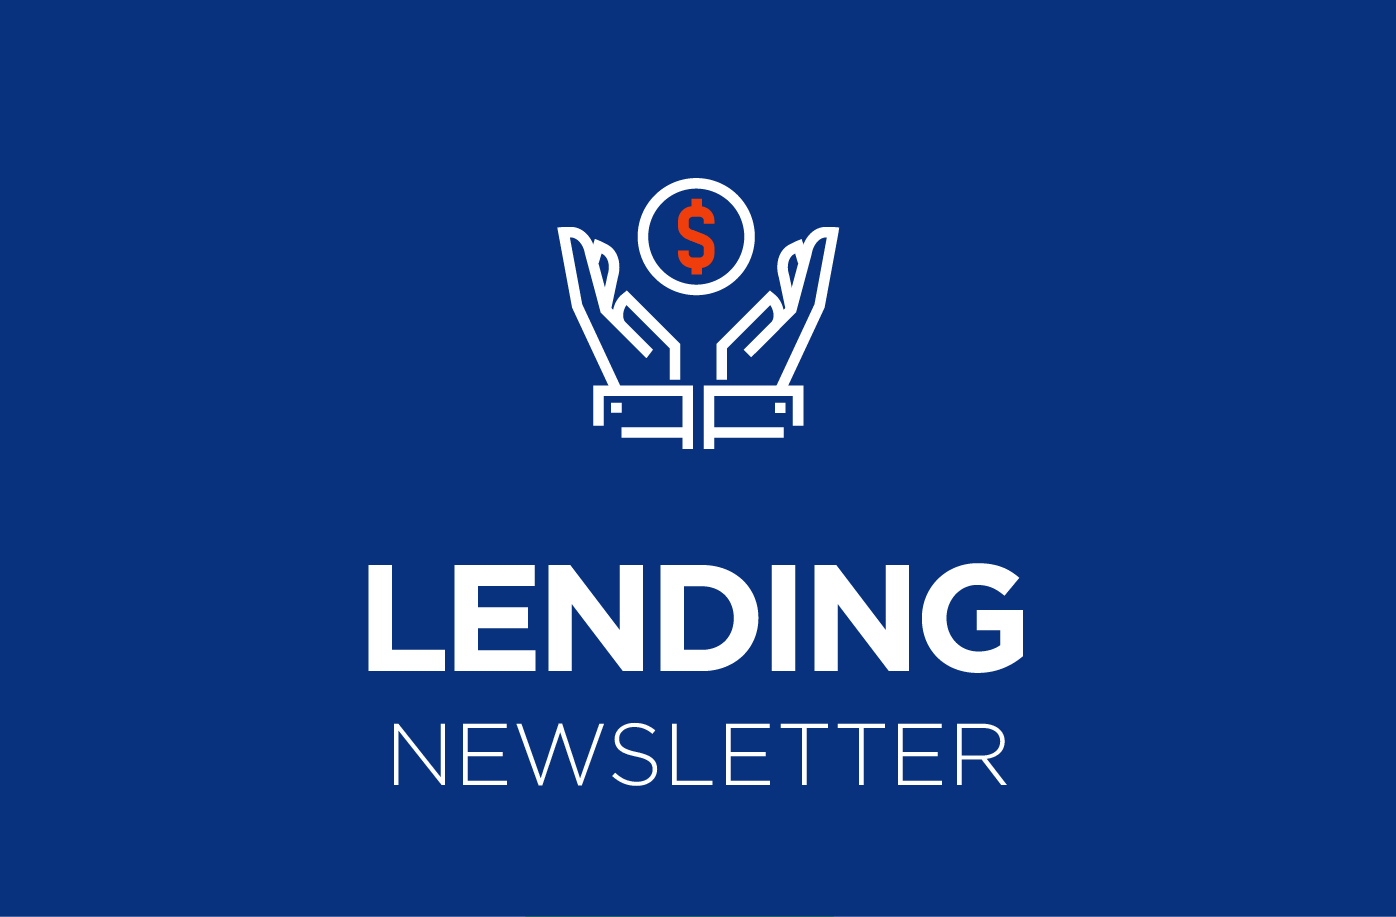 This week in lending: 2021 BNPL results, credit markets poised for growth this year